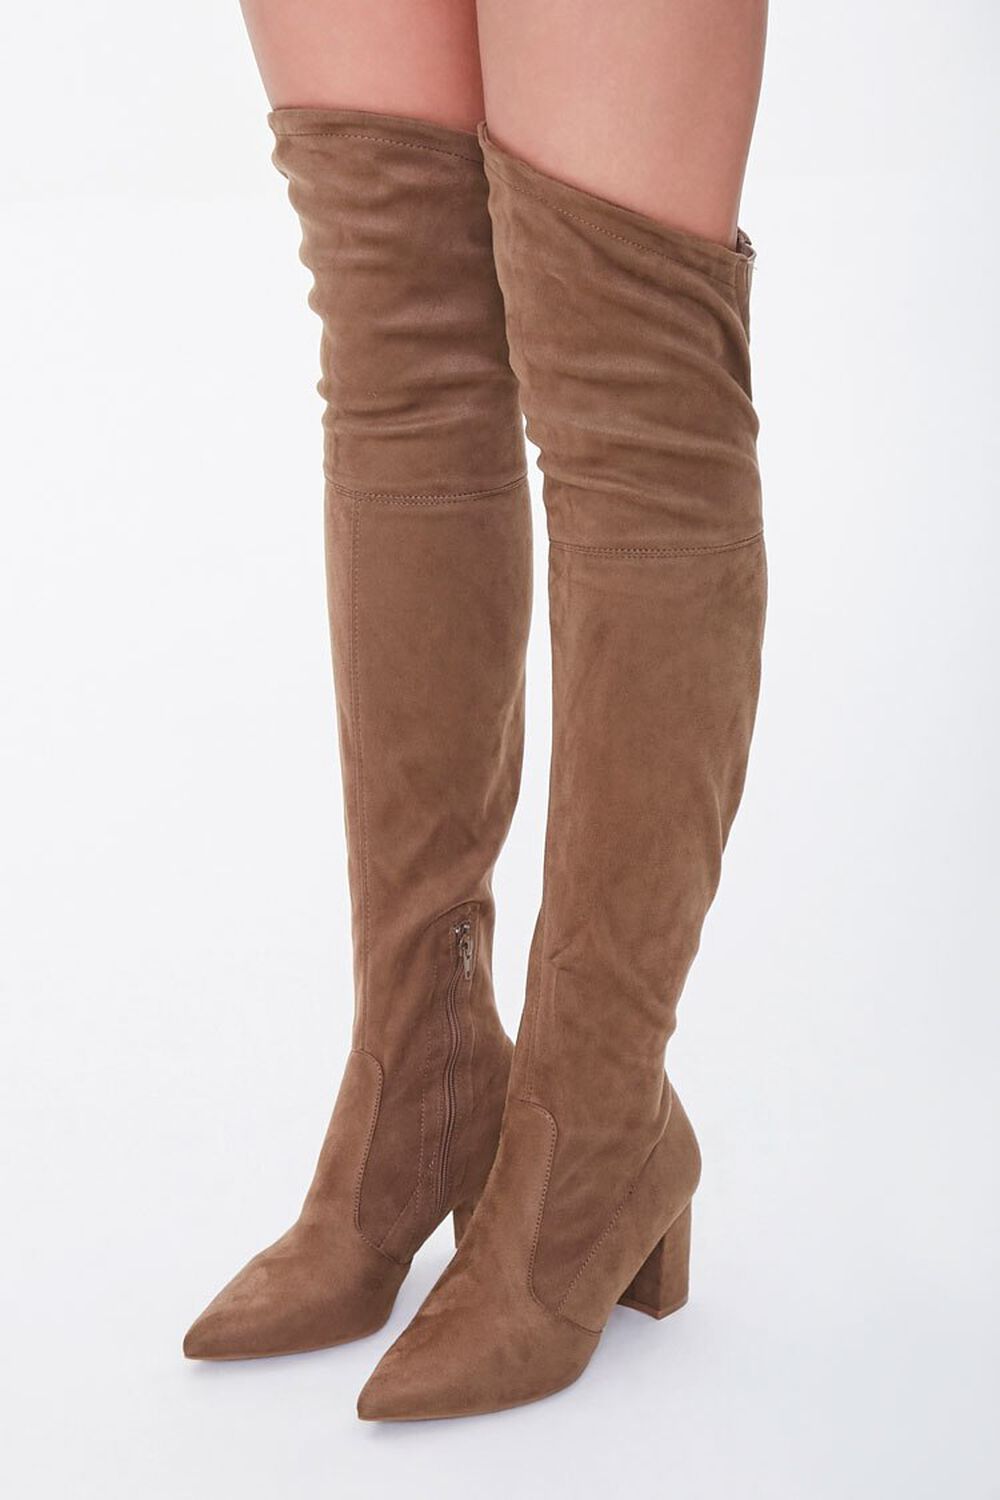 TAUPE Faux Suede Over-the-Knee Boots, image 1